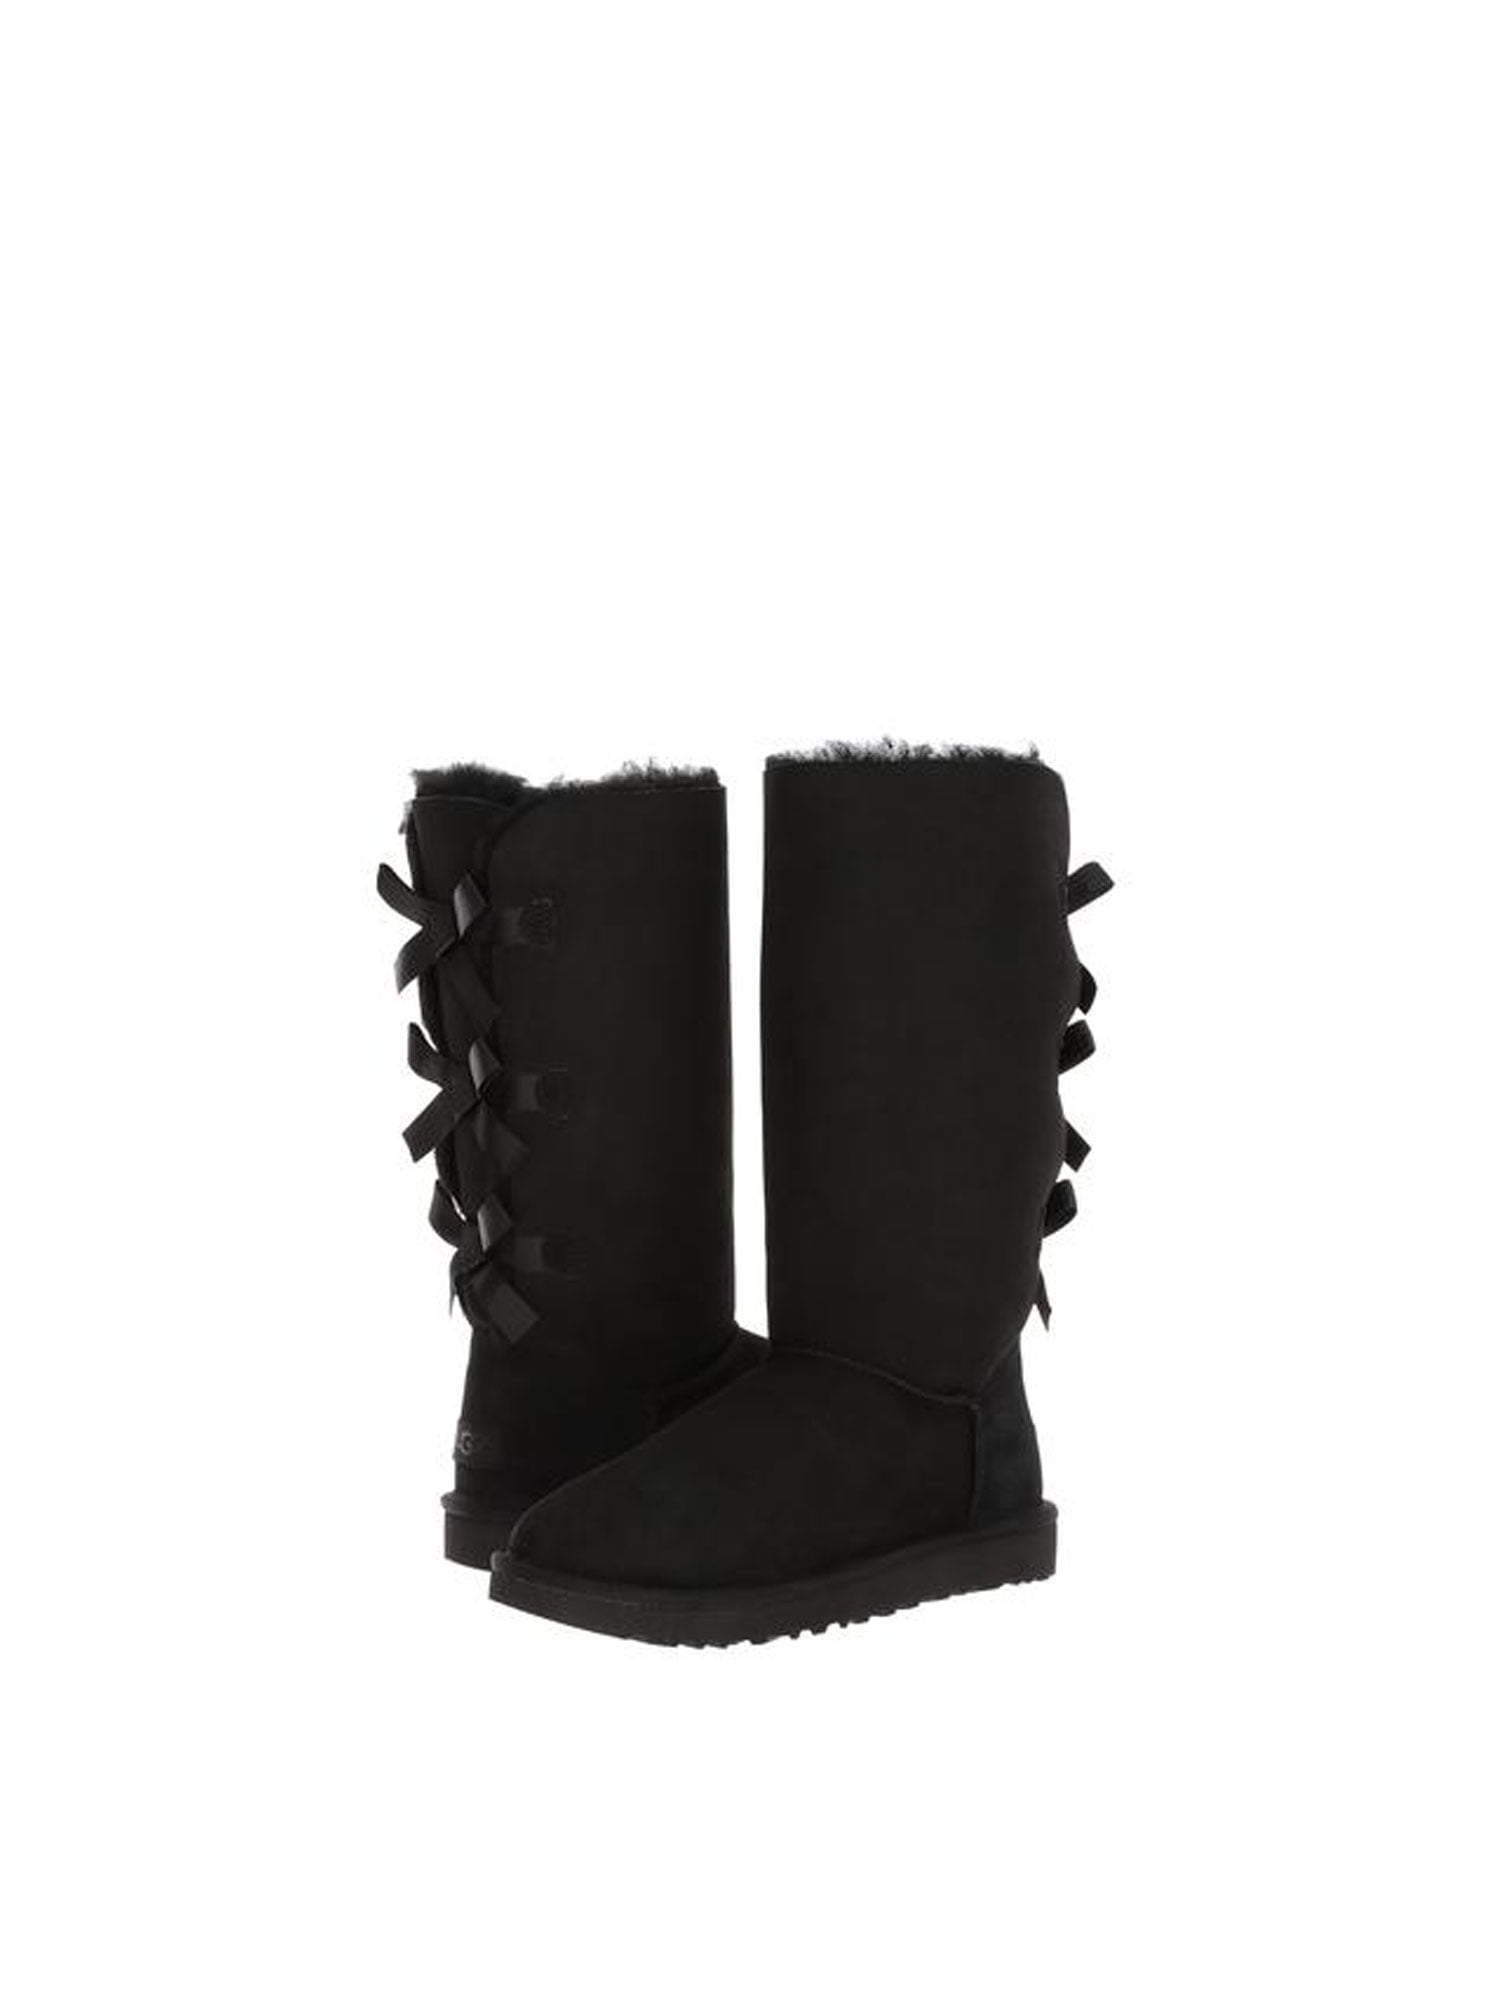 womens tall ugg boots with bows